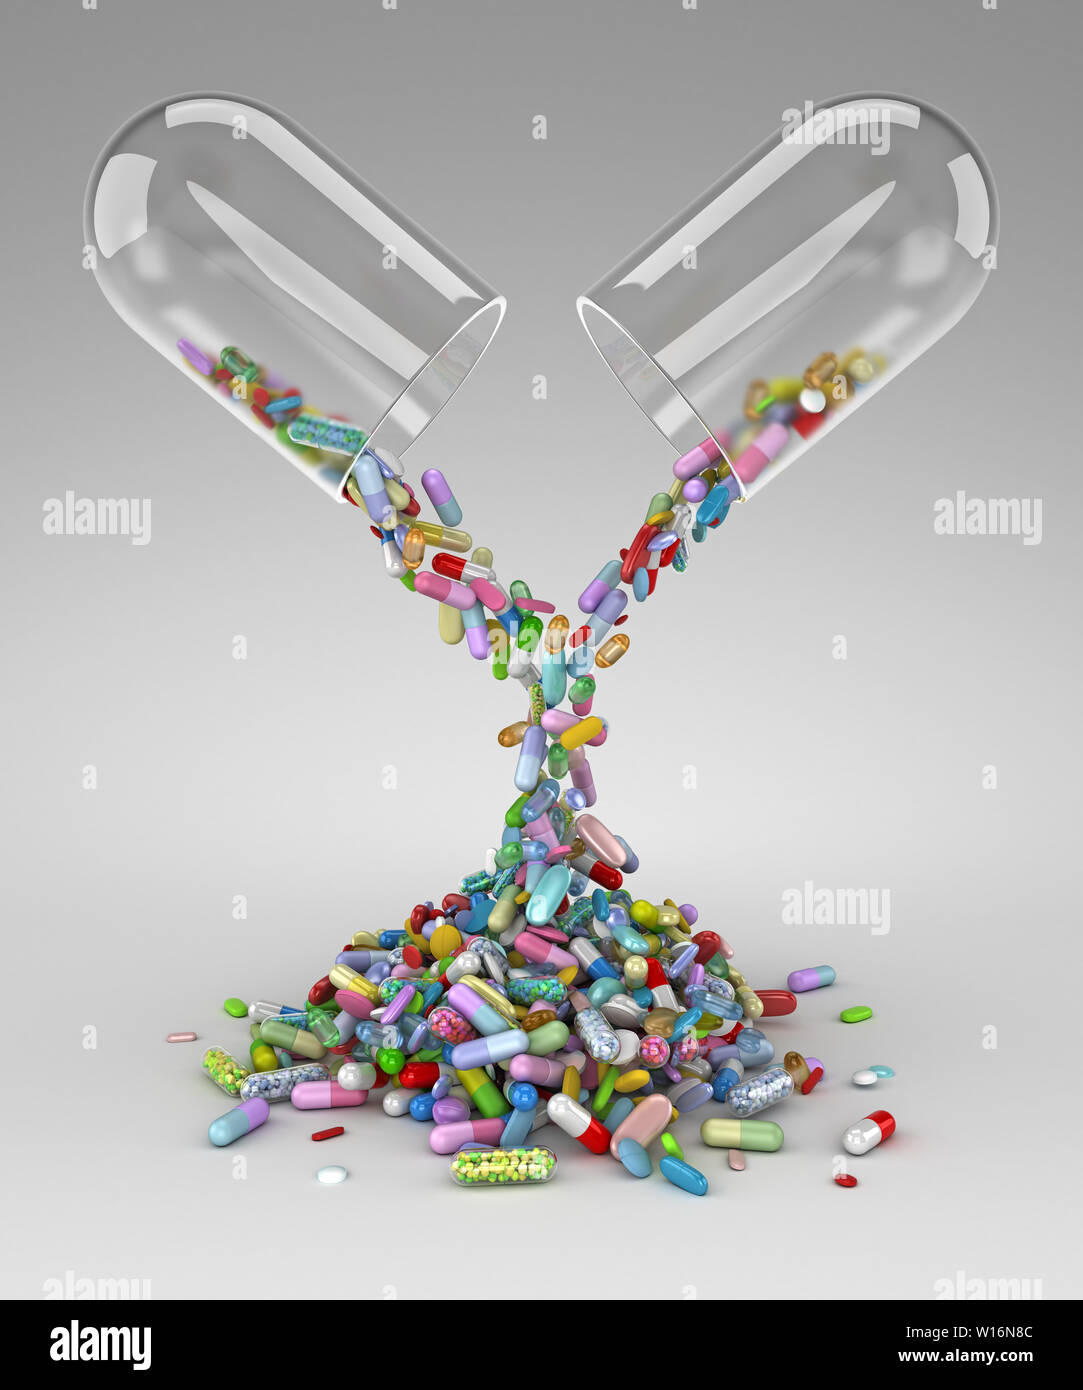 Large pill emptying a pile of colorful pills - 3d render Stock Photo